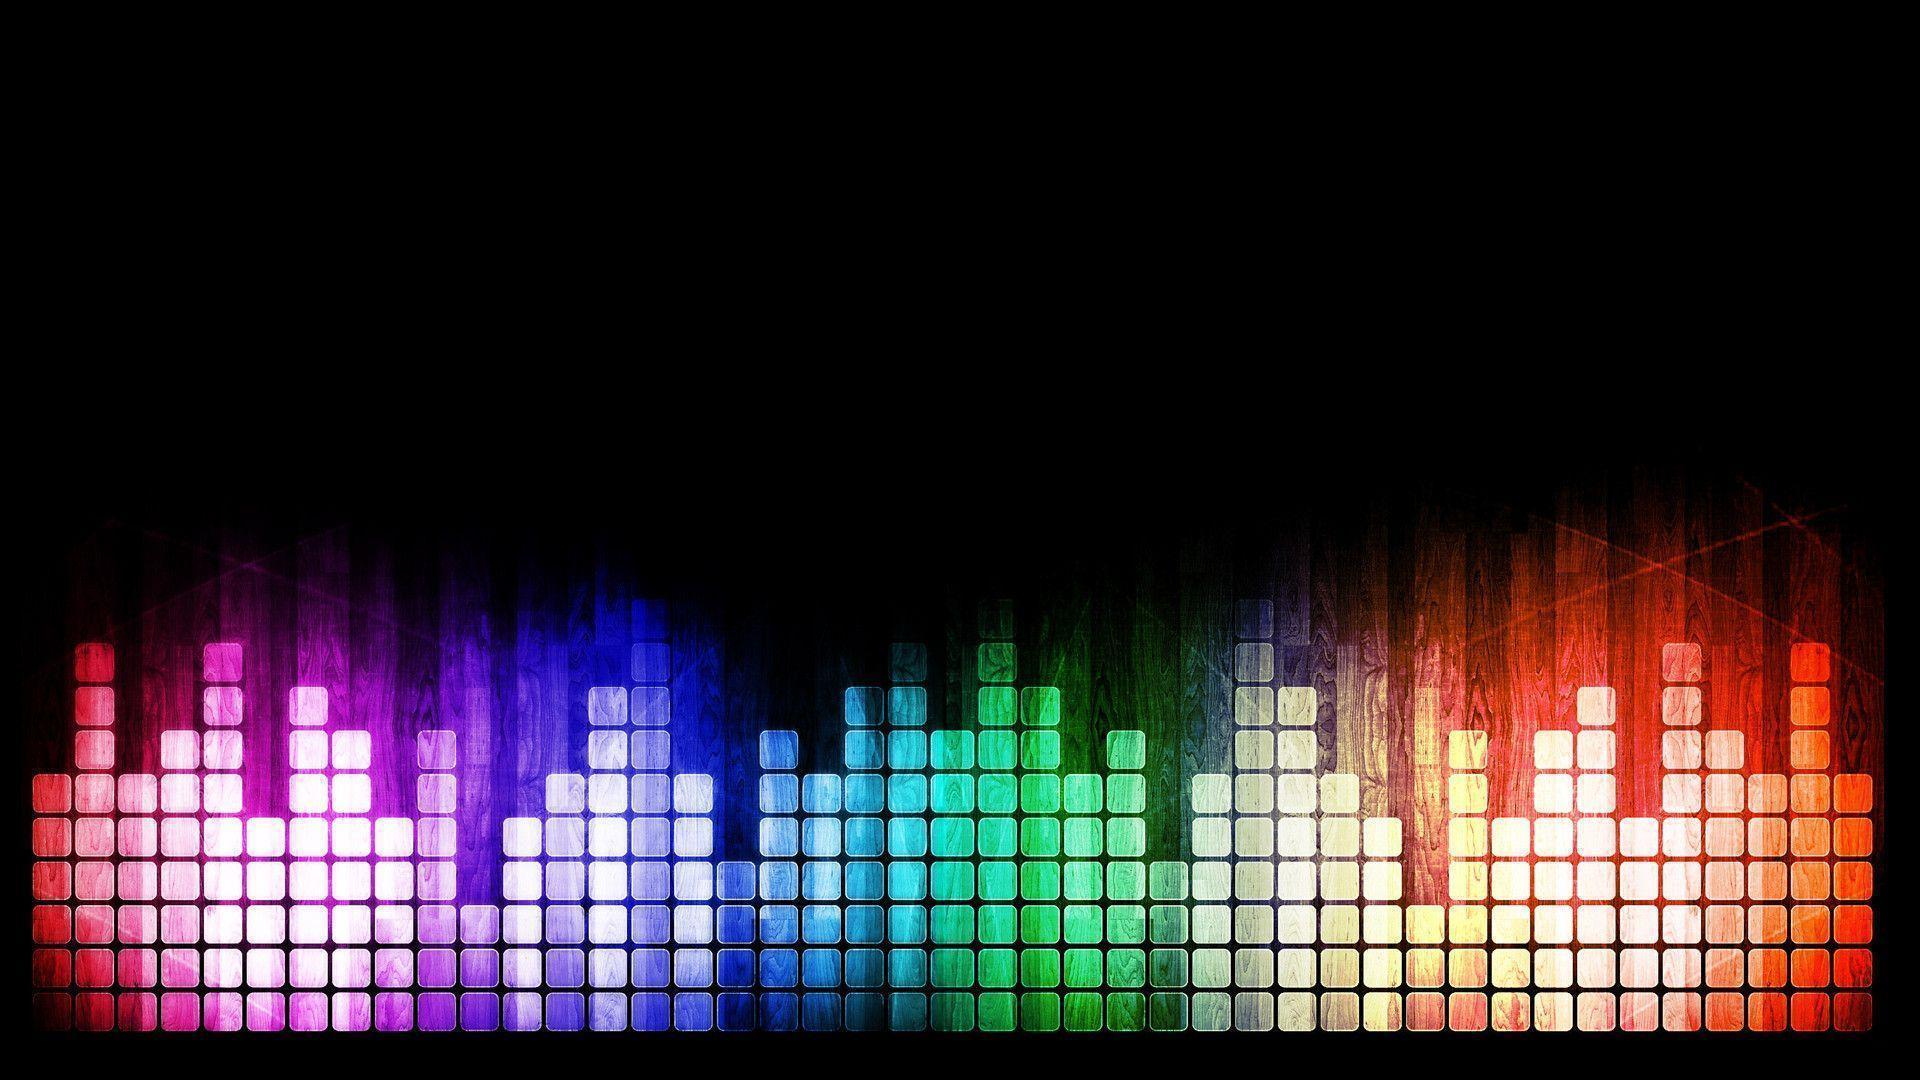 Wallpaper For > Awesome Music Wallpaper Background